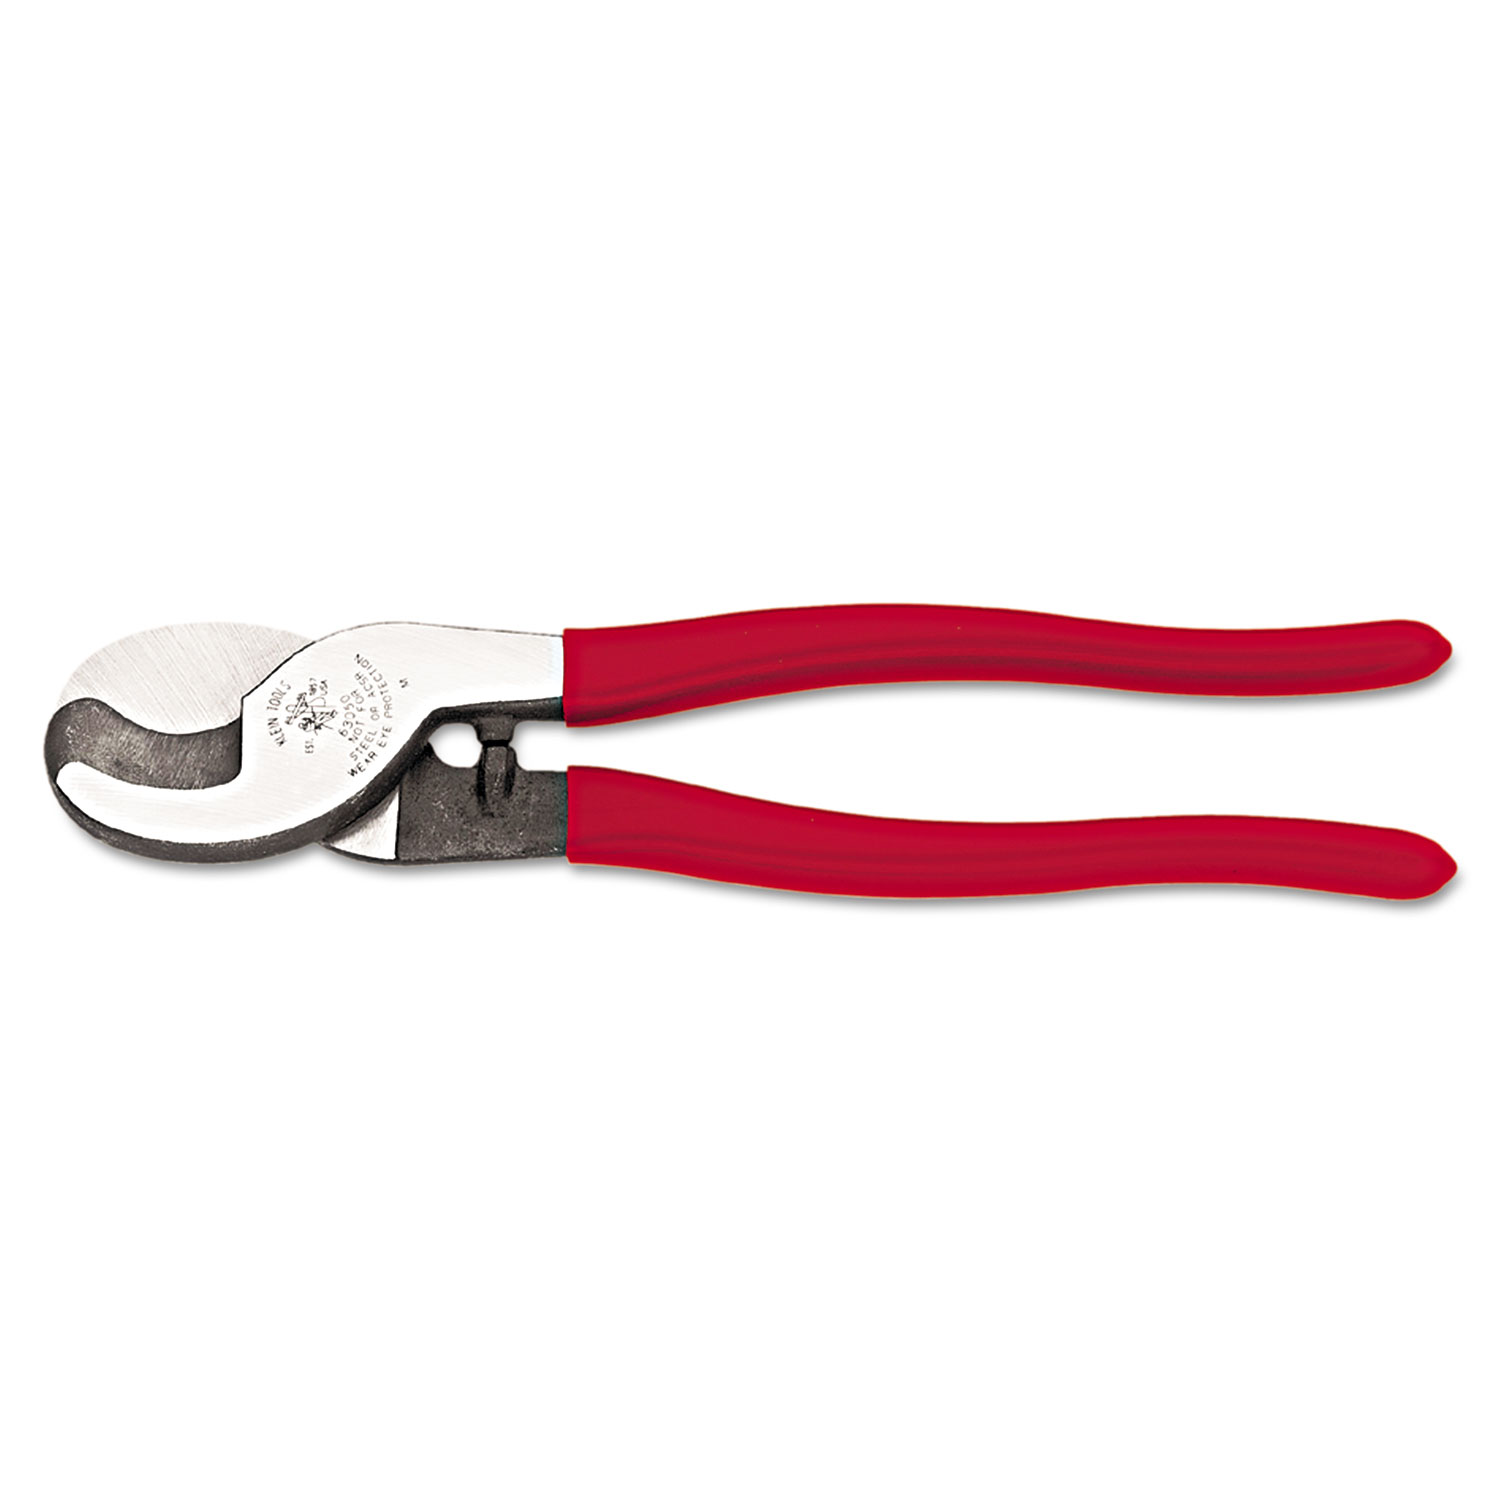  Klein Tools 63050 High-Leverage Cable Cutters, 9 1/2 Tool Length, 1 2/5Cut Length (KLN63050) 